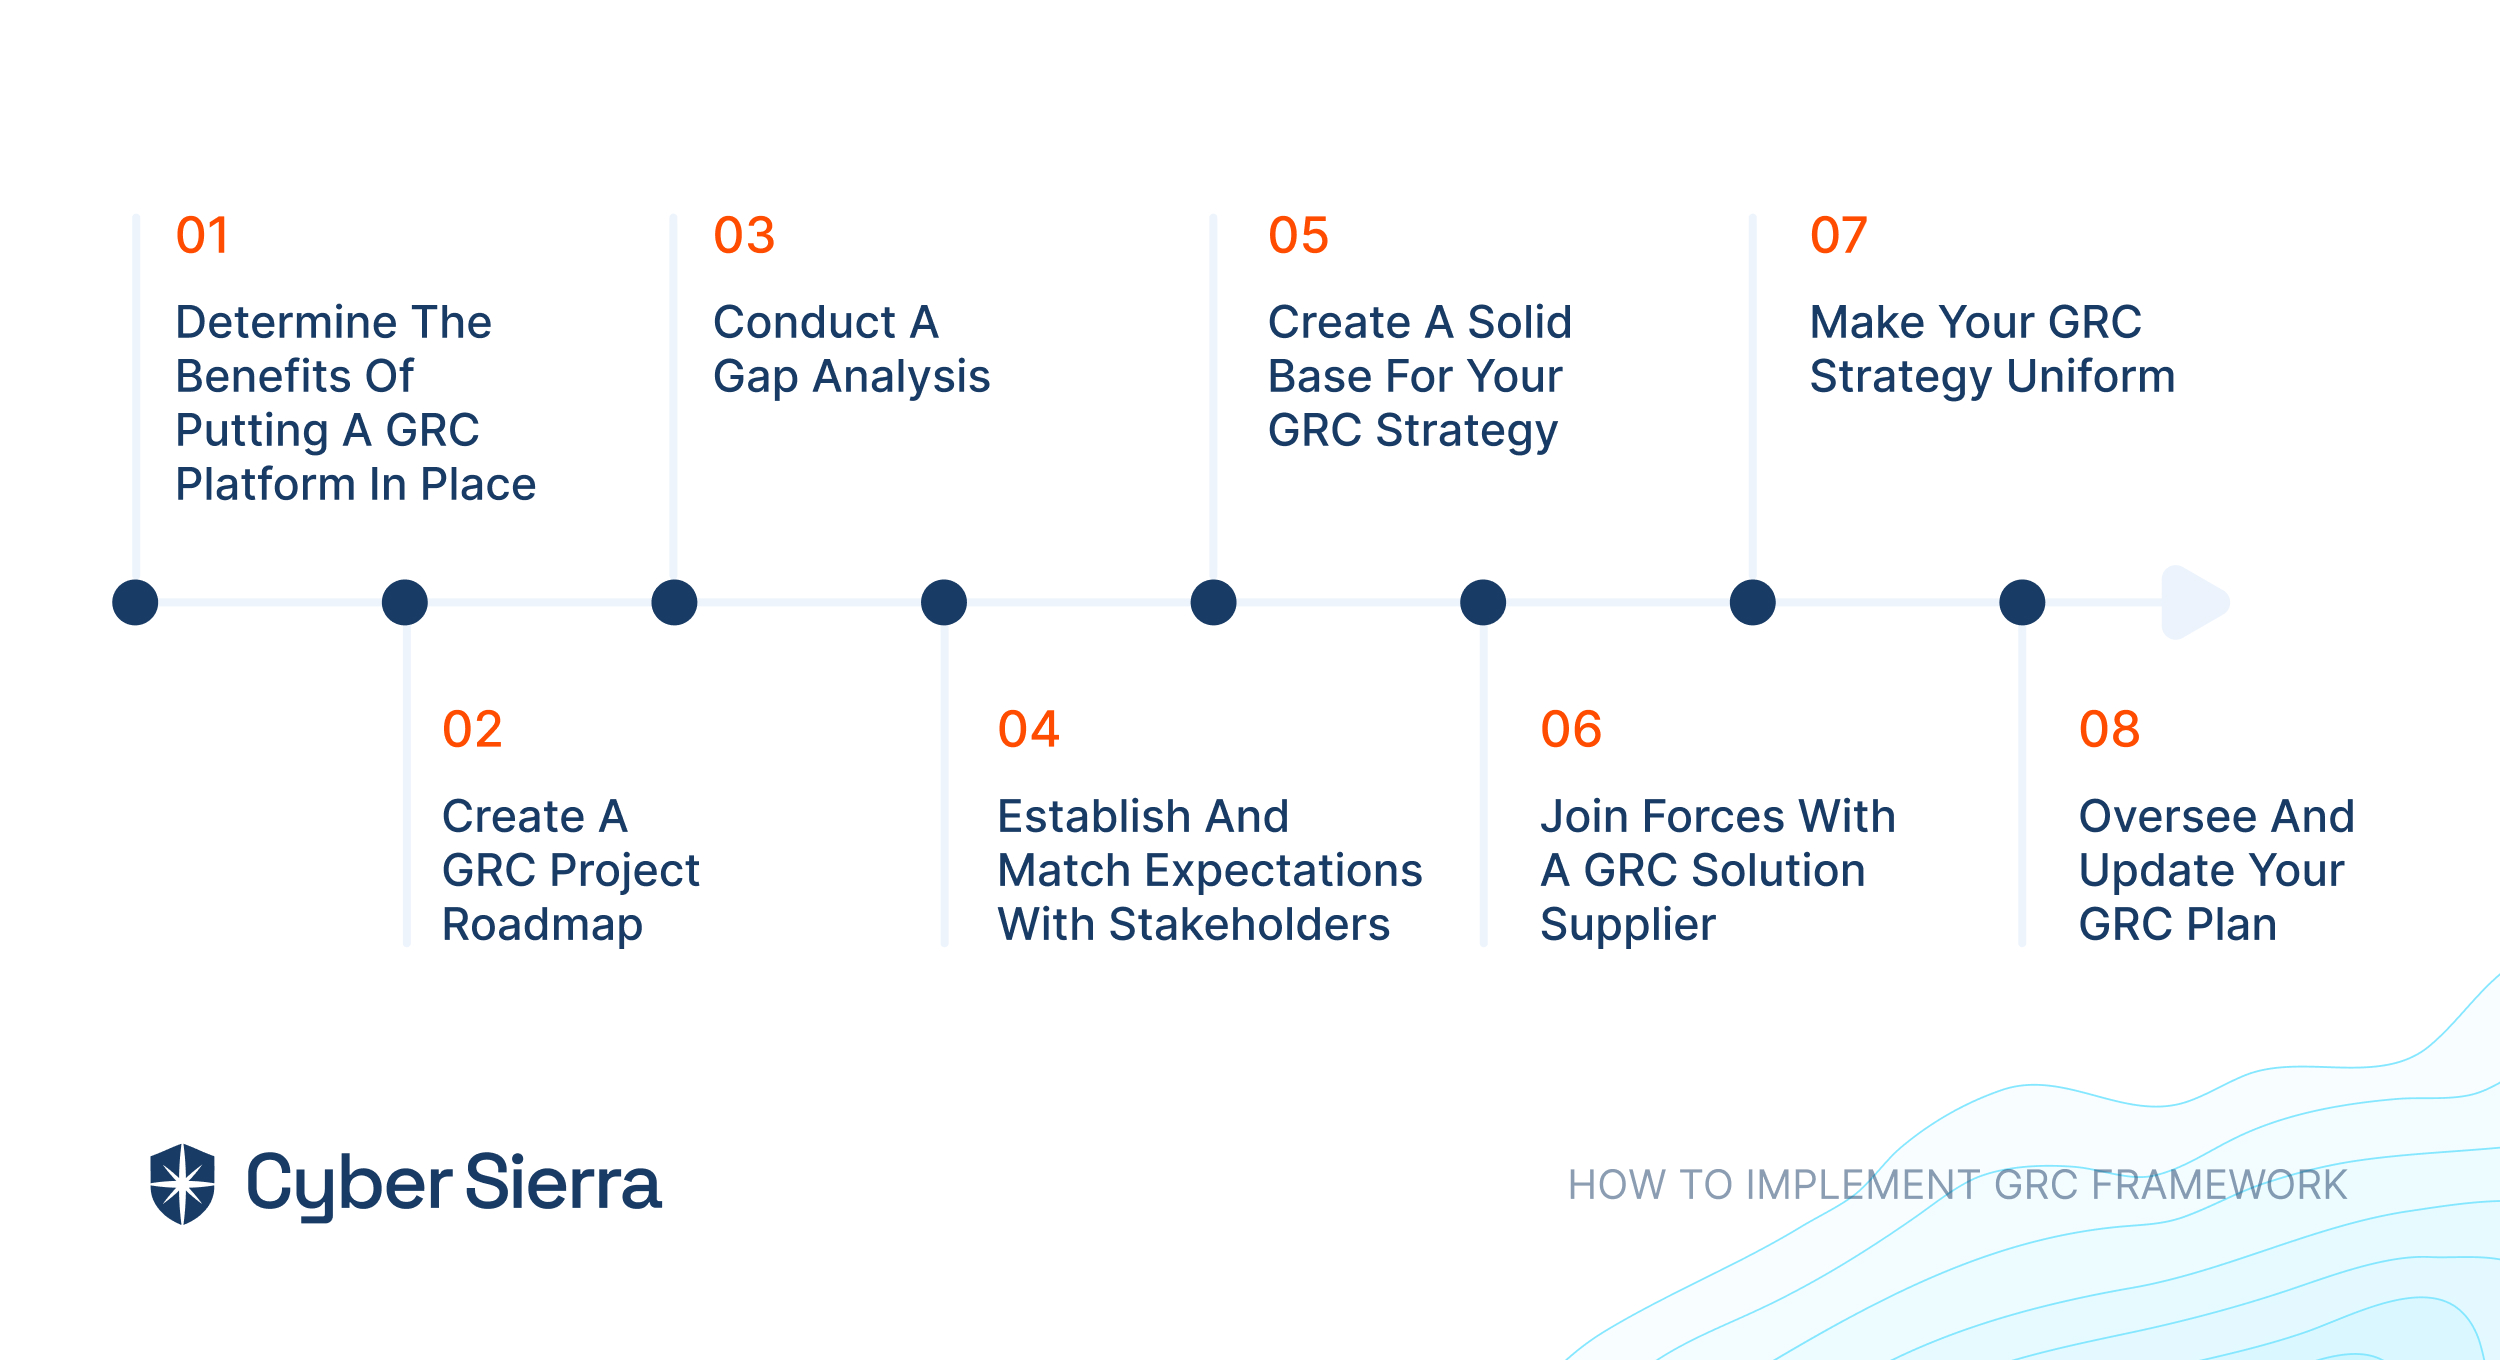 how to implement GRC framework